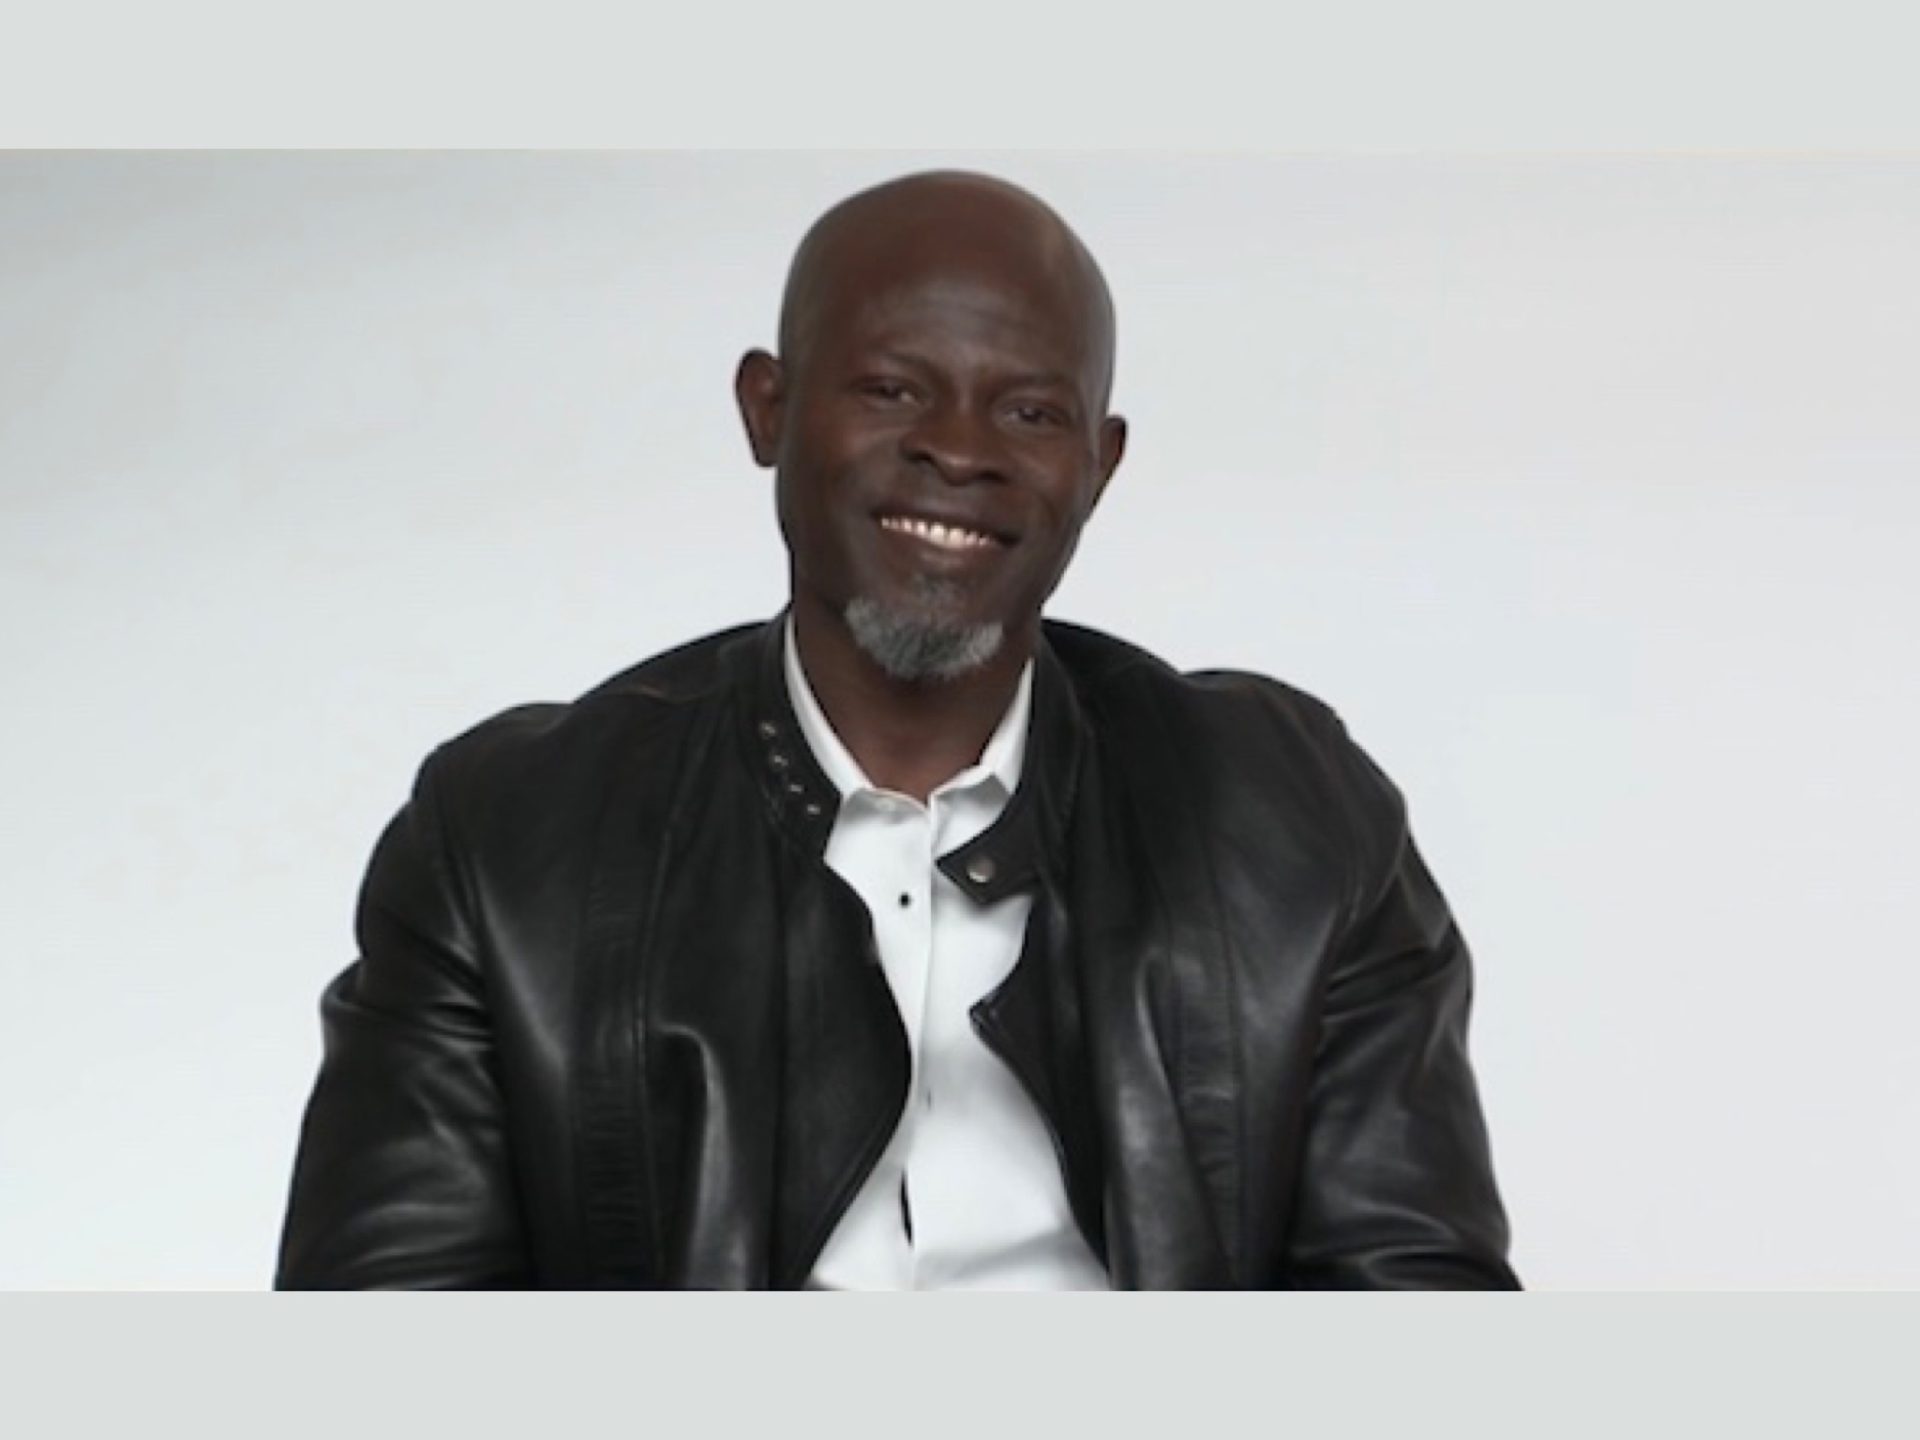 Djimon Hounsou feels 'tremendously cheated' by Hollywood